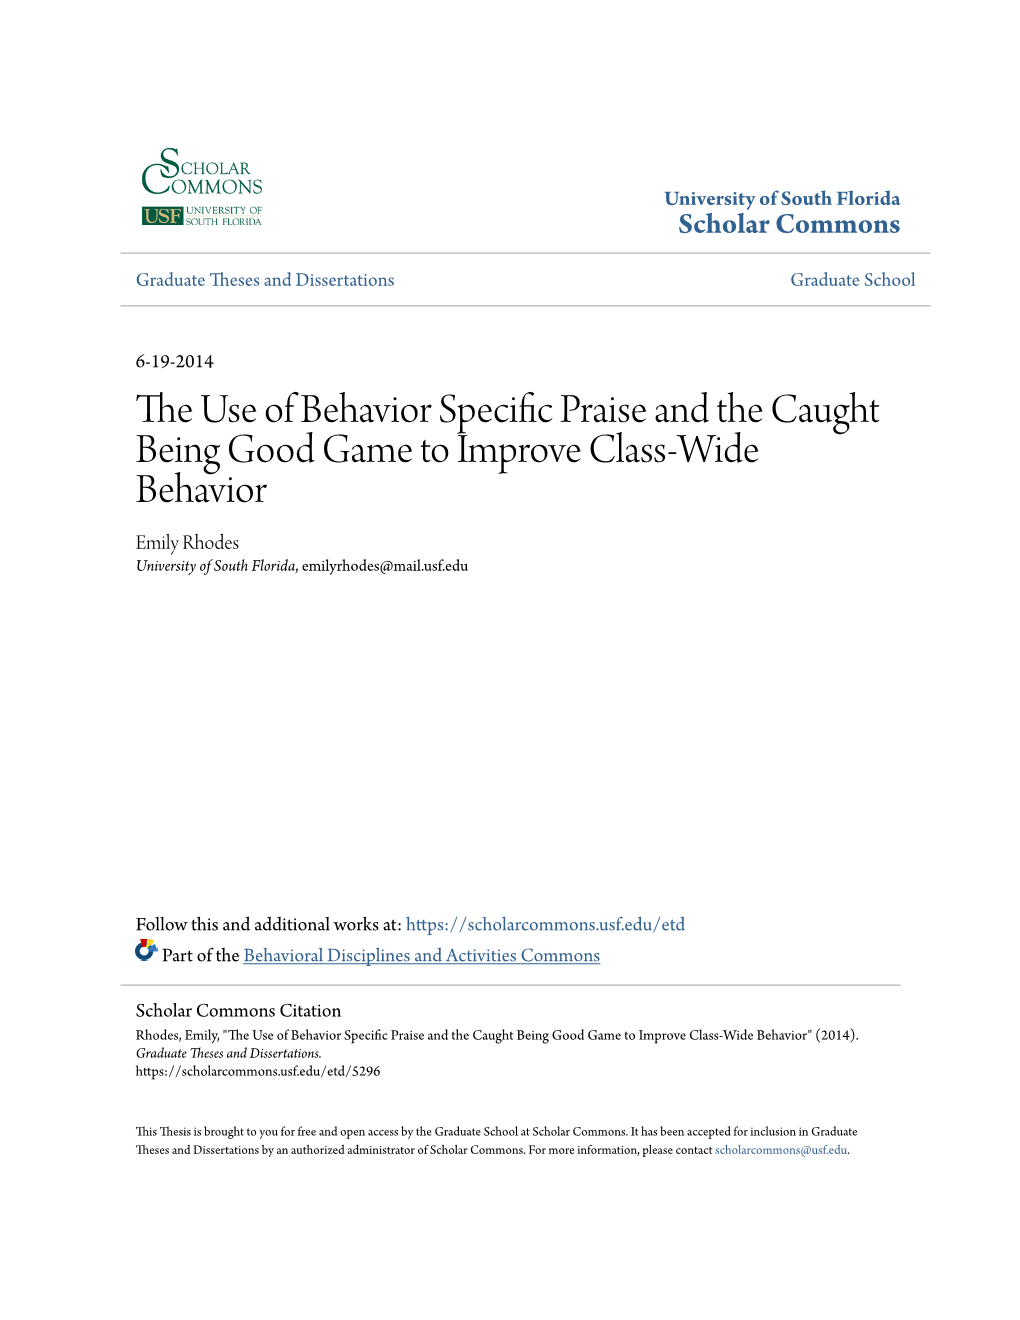 The Use of Behavior Specific Praise and the Caught Being Good Game to Improve Class-Wide Behavior